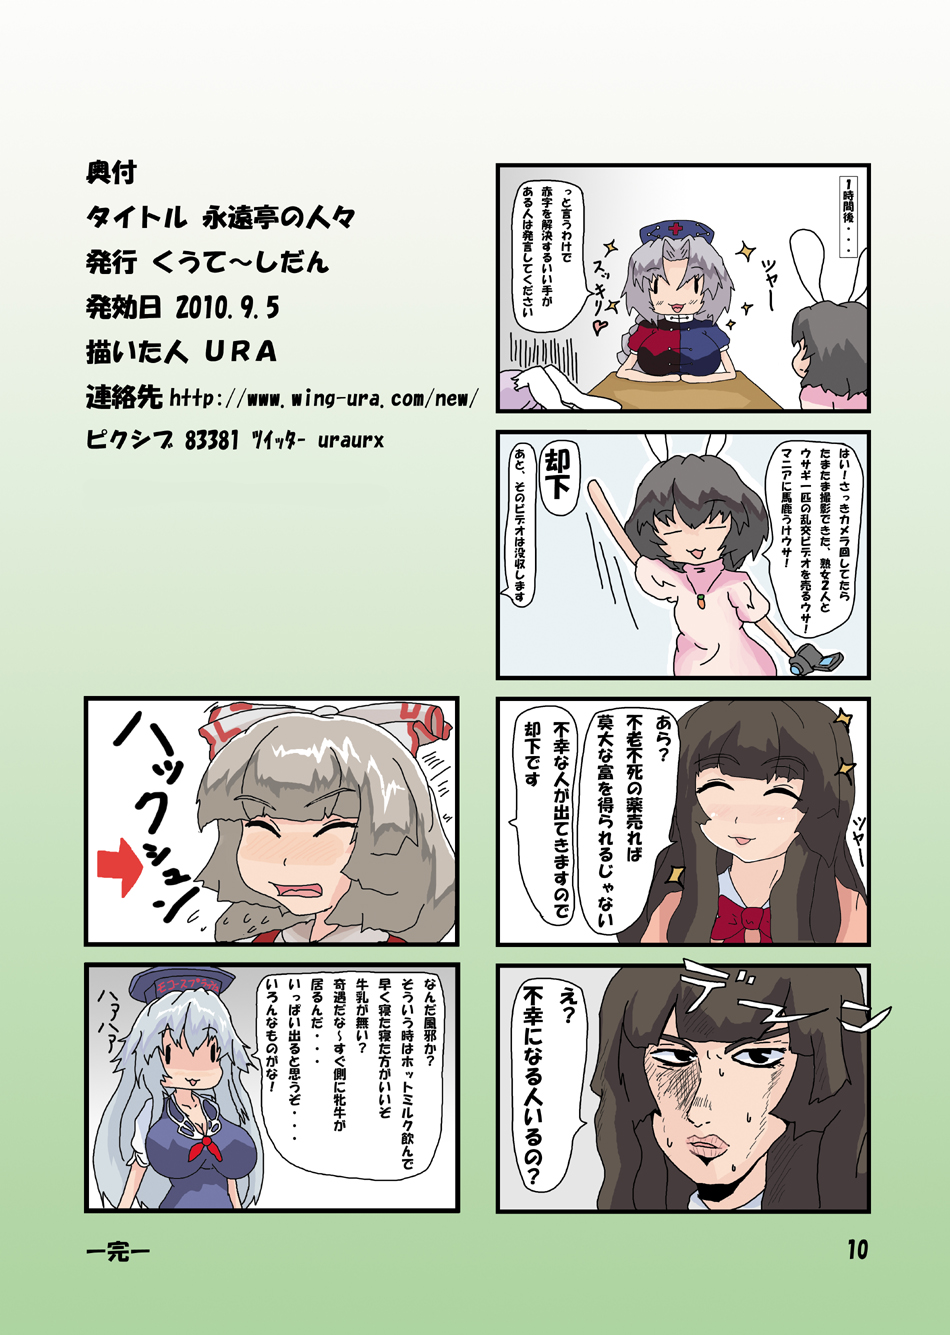 [noizu] 教えてけーね先生×永遠亭の人々 (Touhou Project) page 21 full